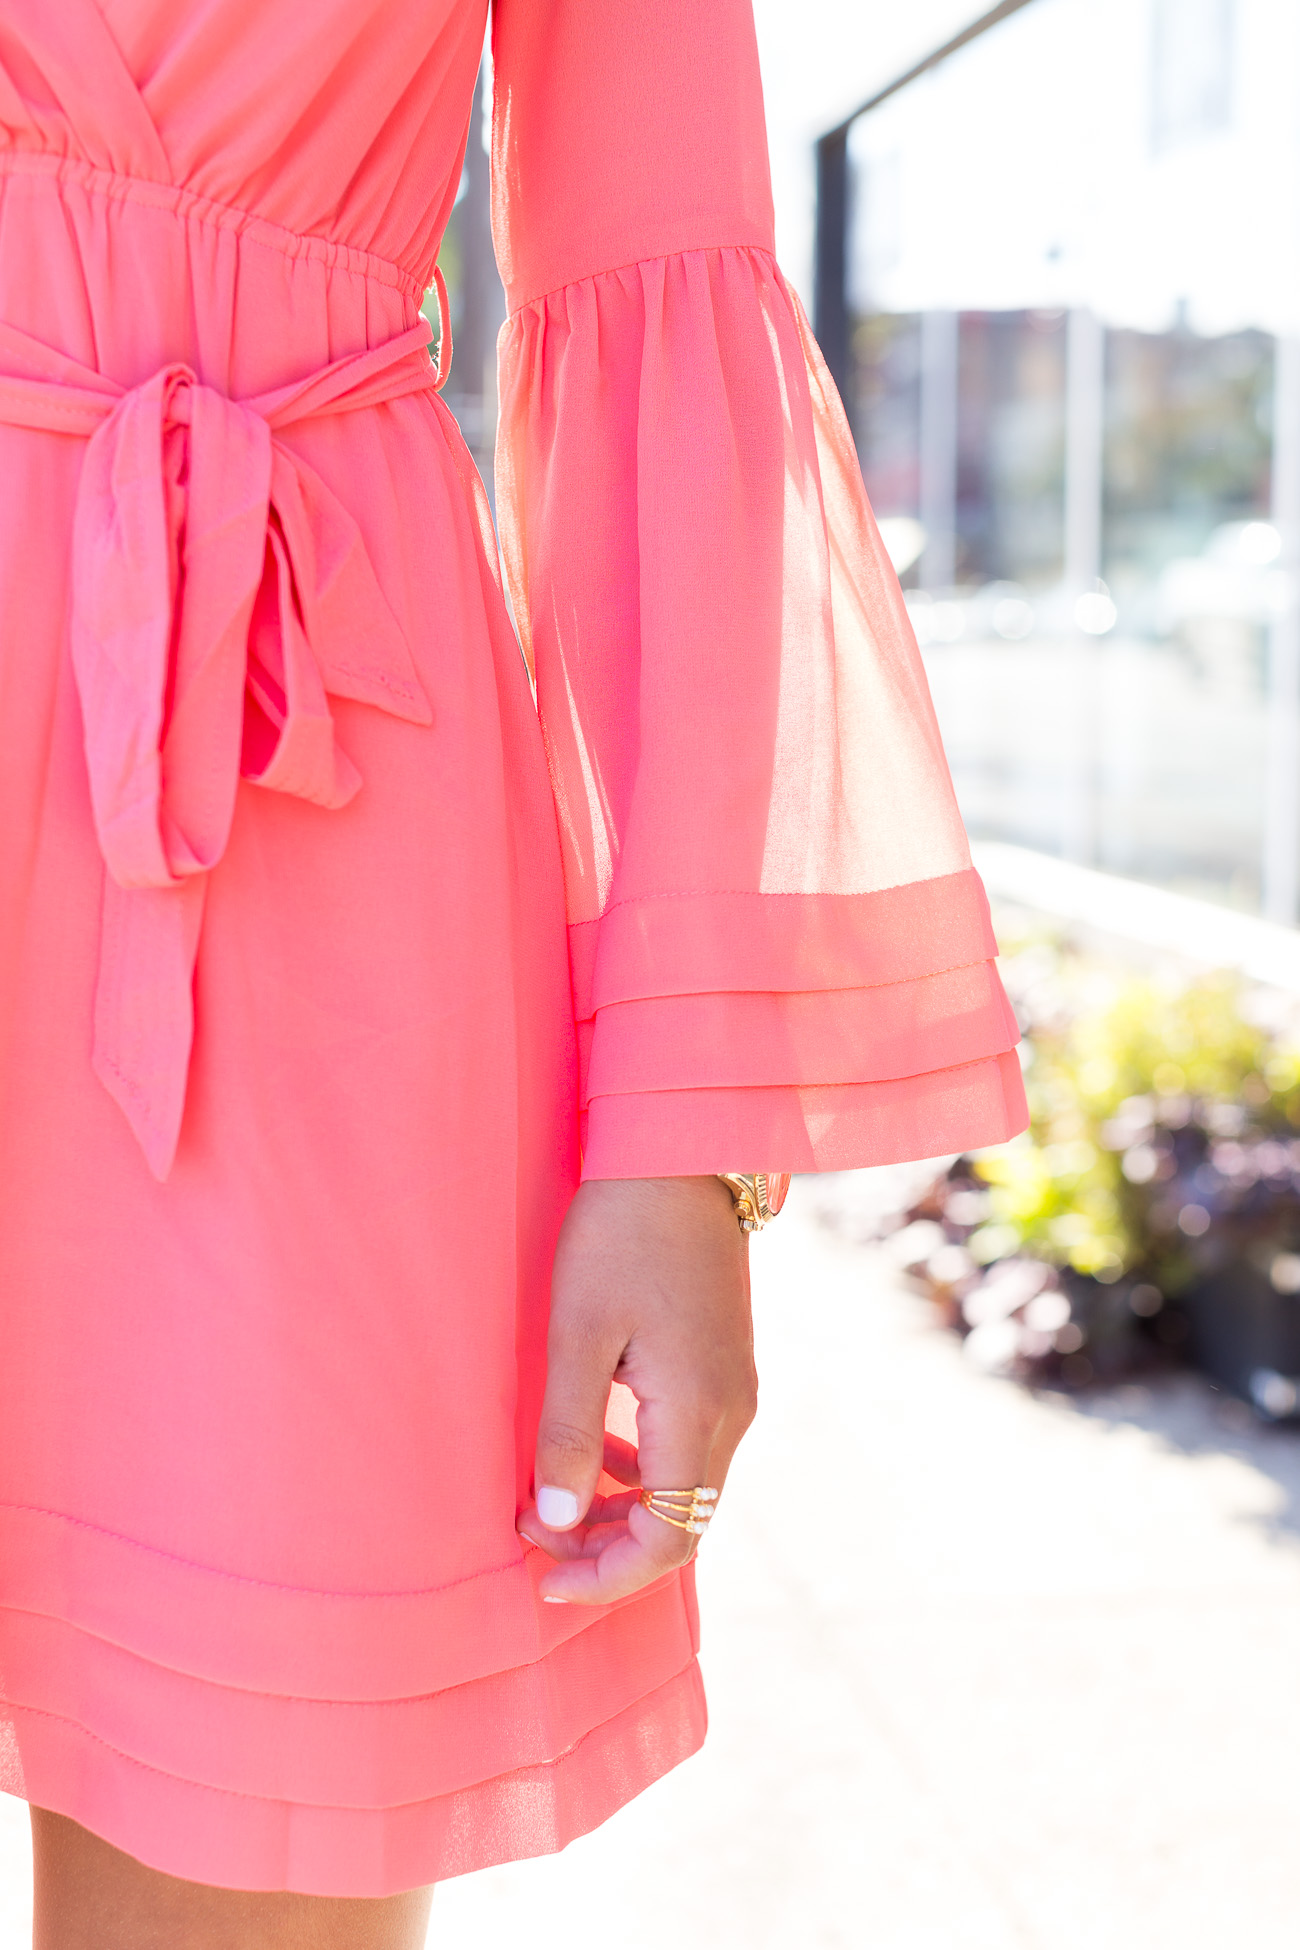 bell sleeves // a southern drawl